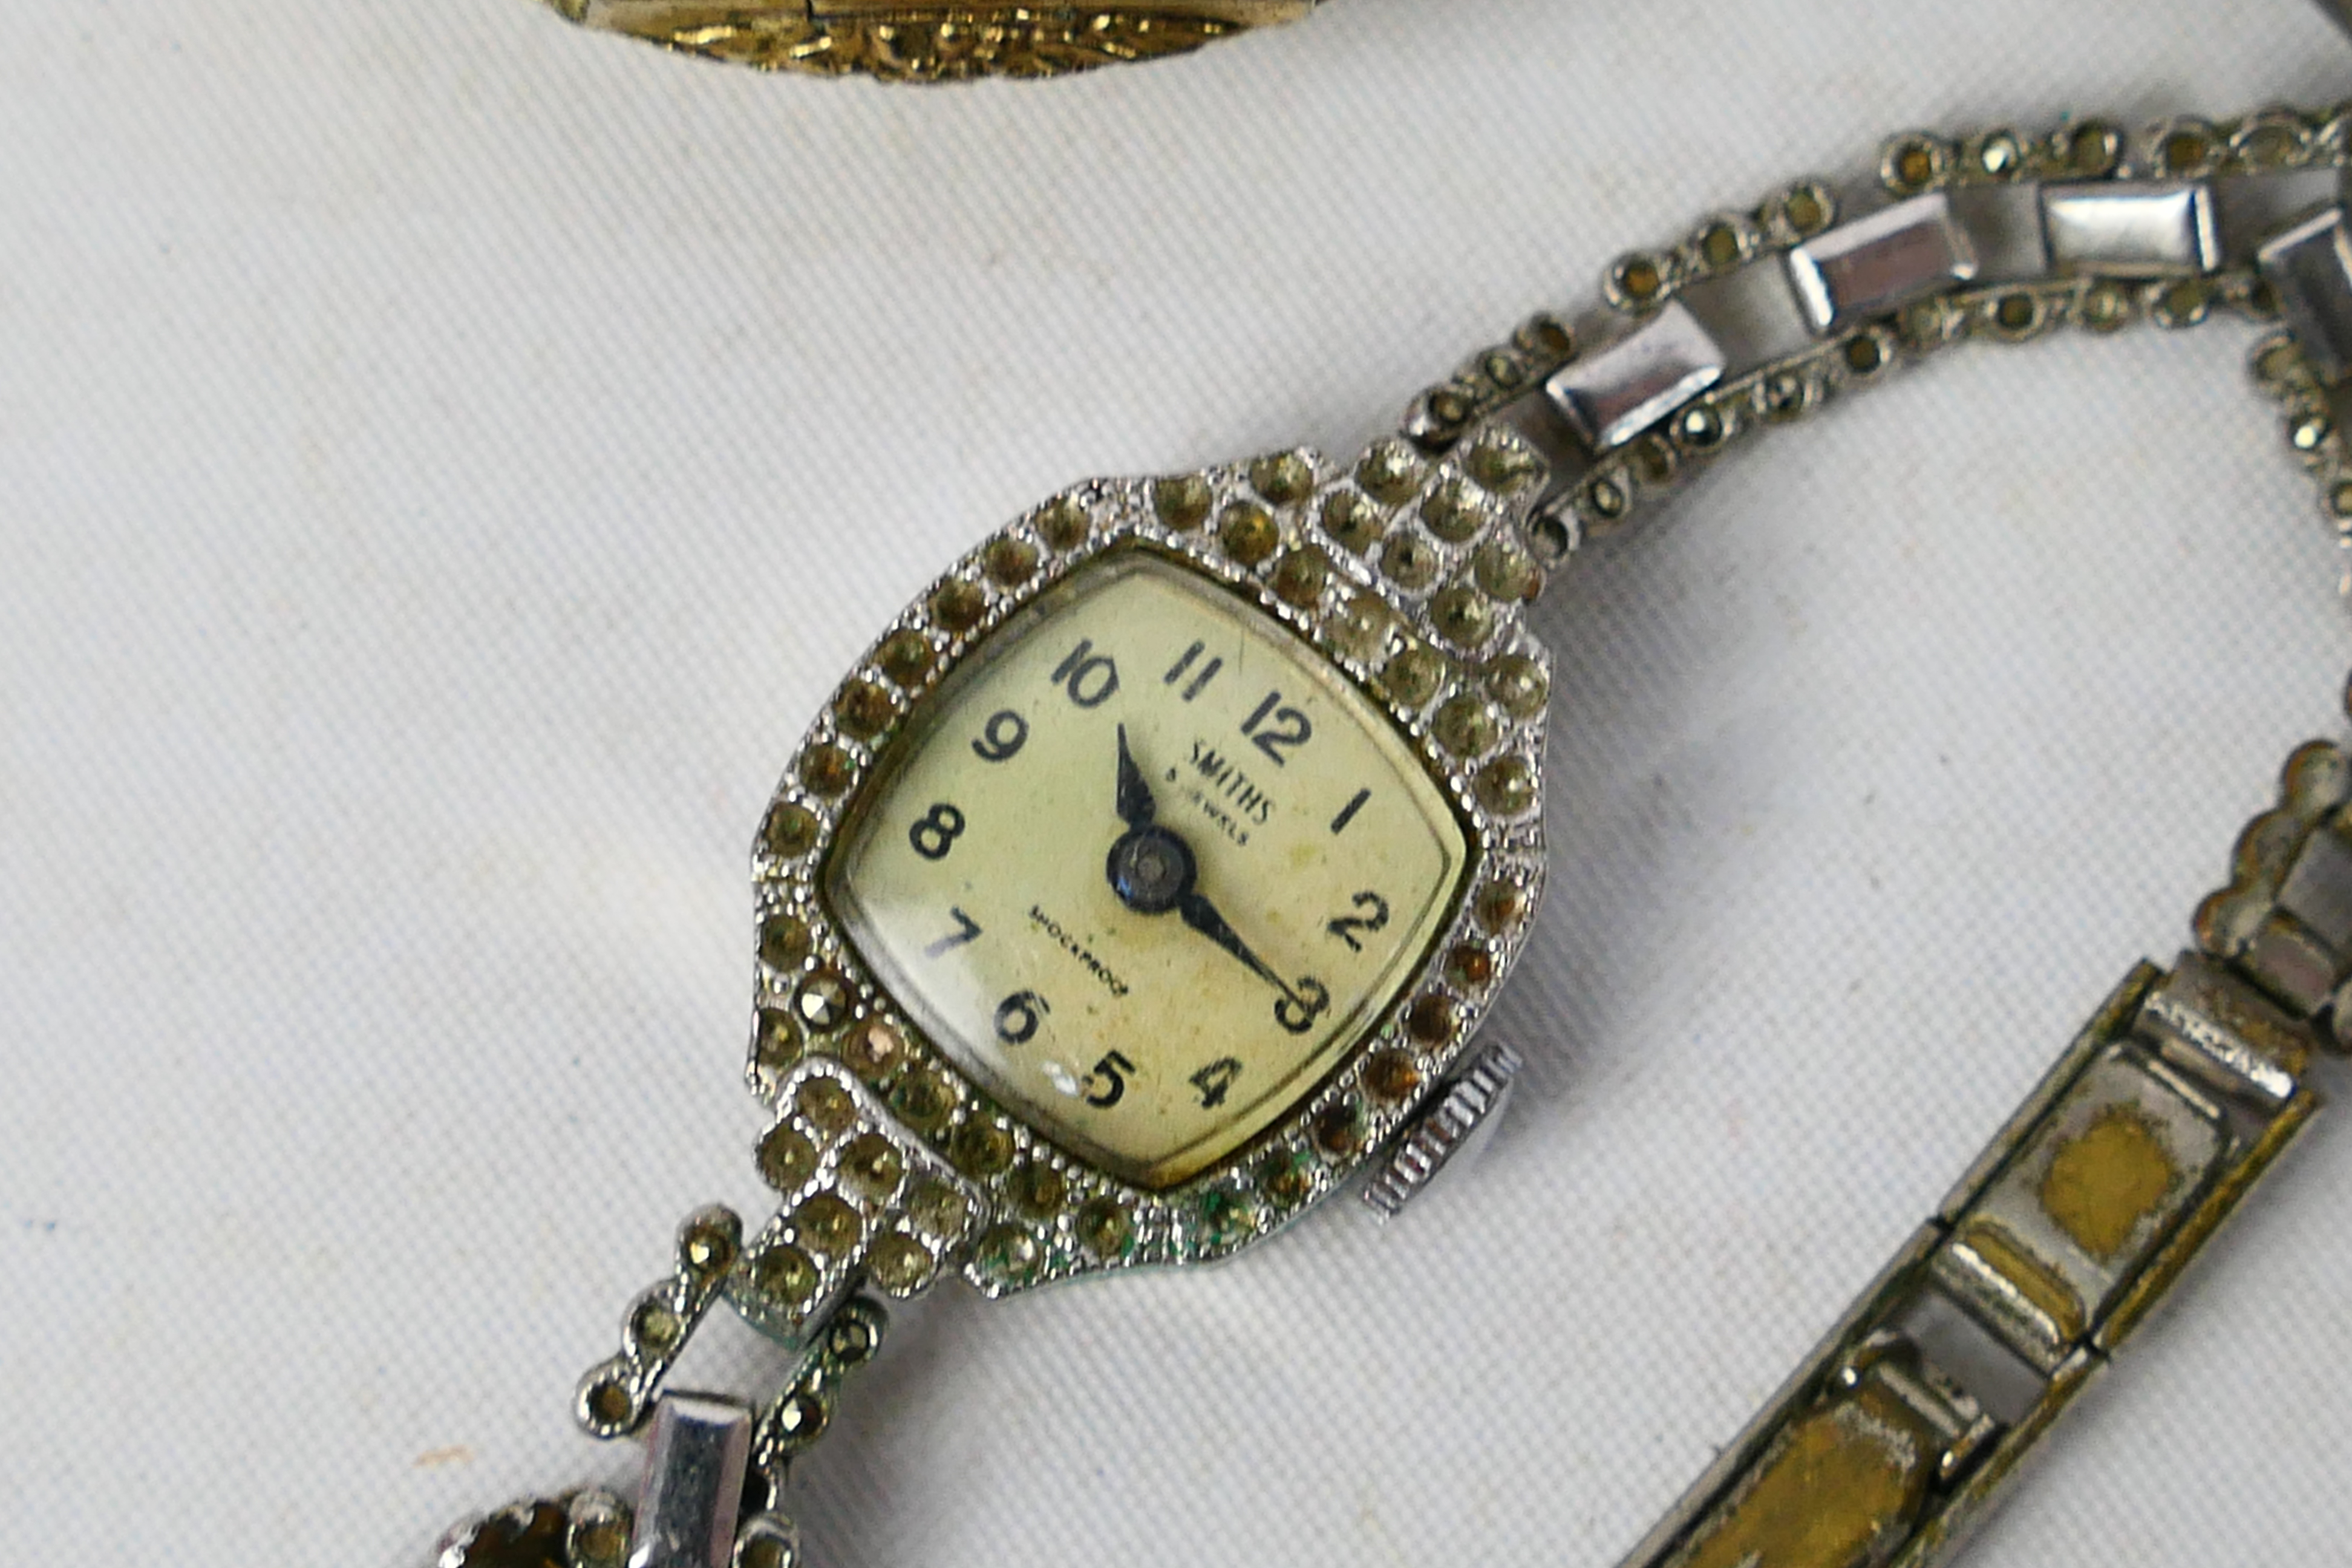 A collection or wrist watches and pocket watches. - Image 2 of 6